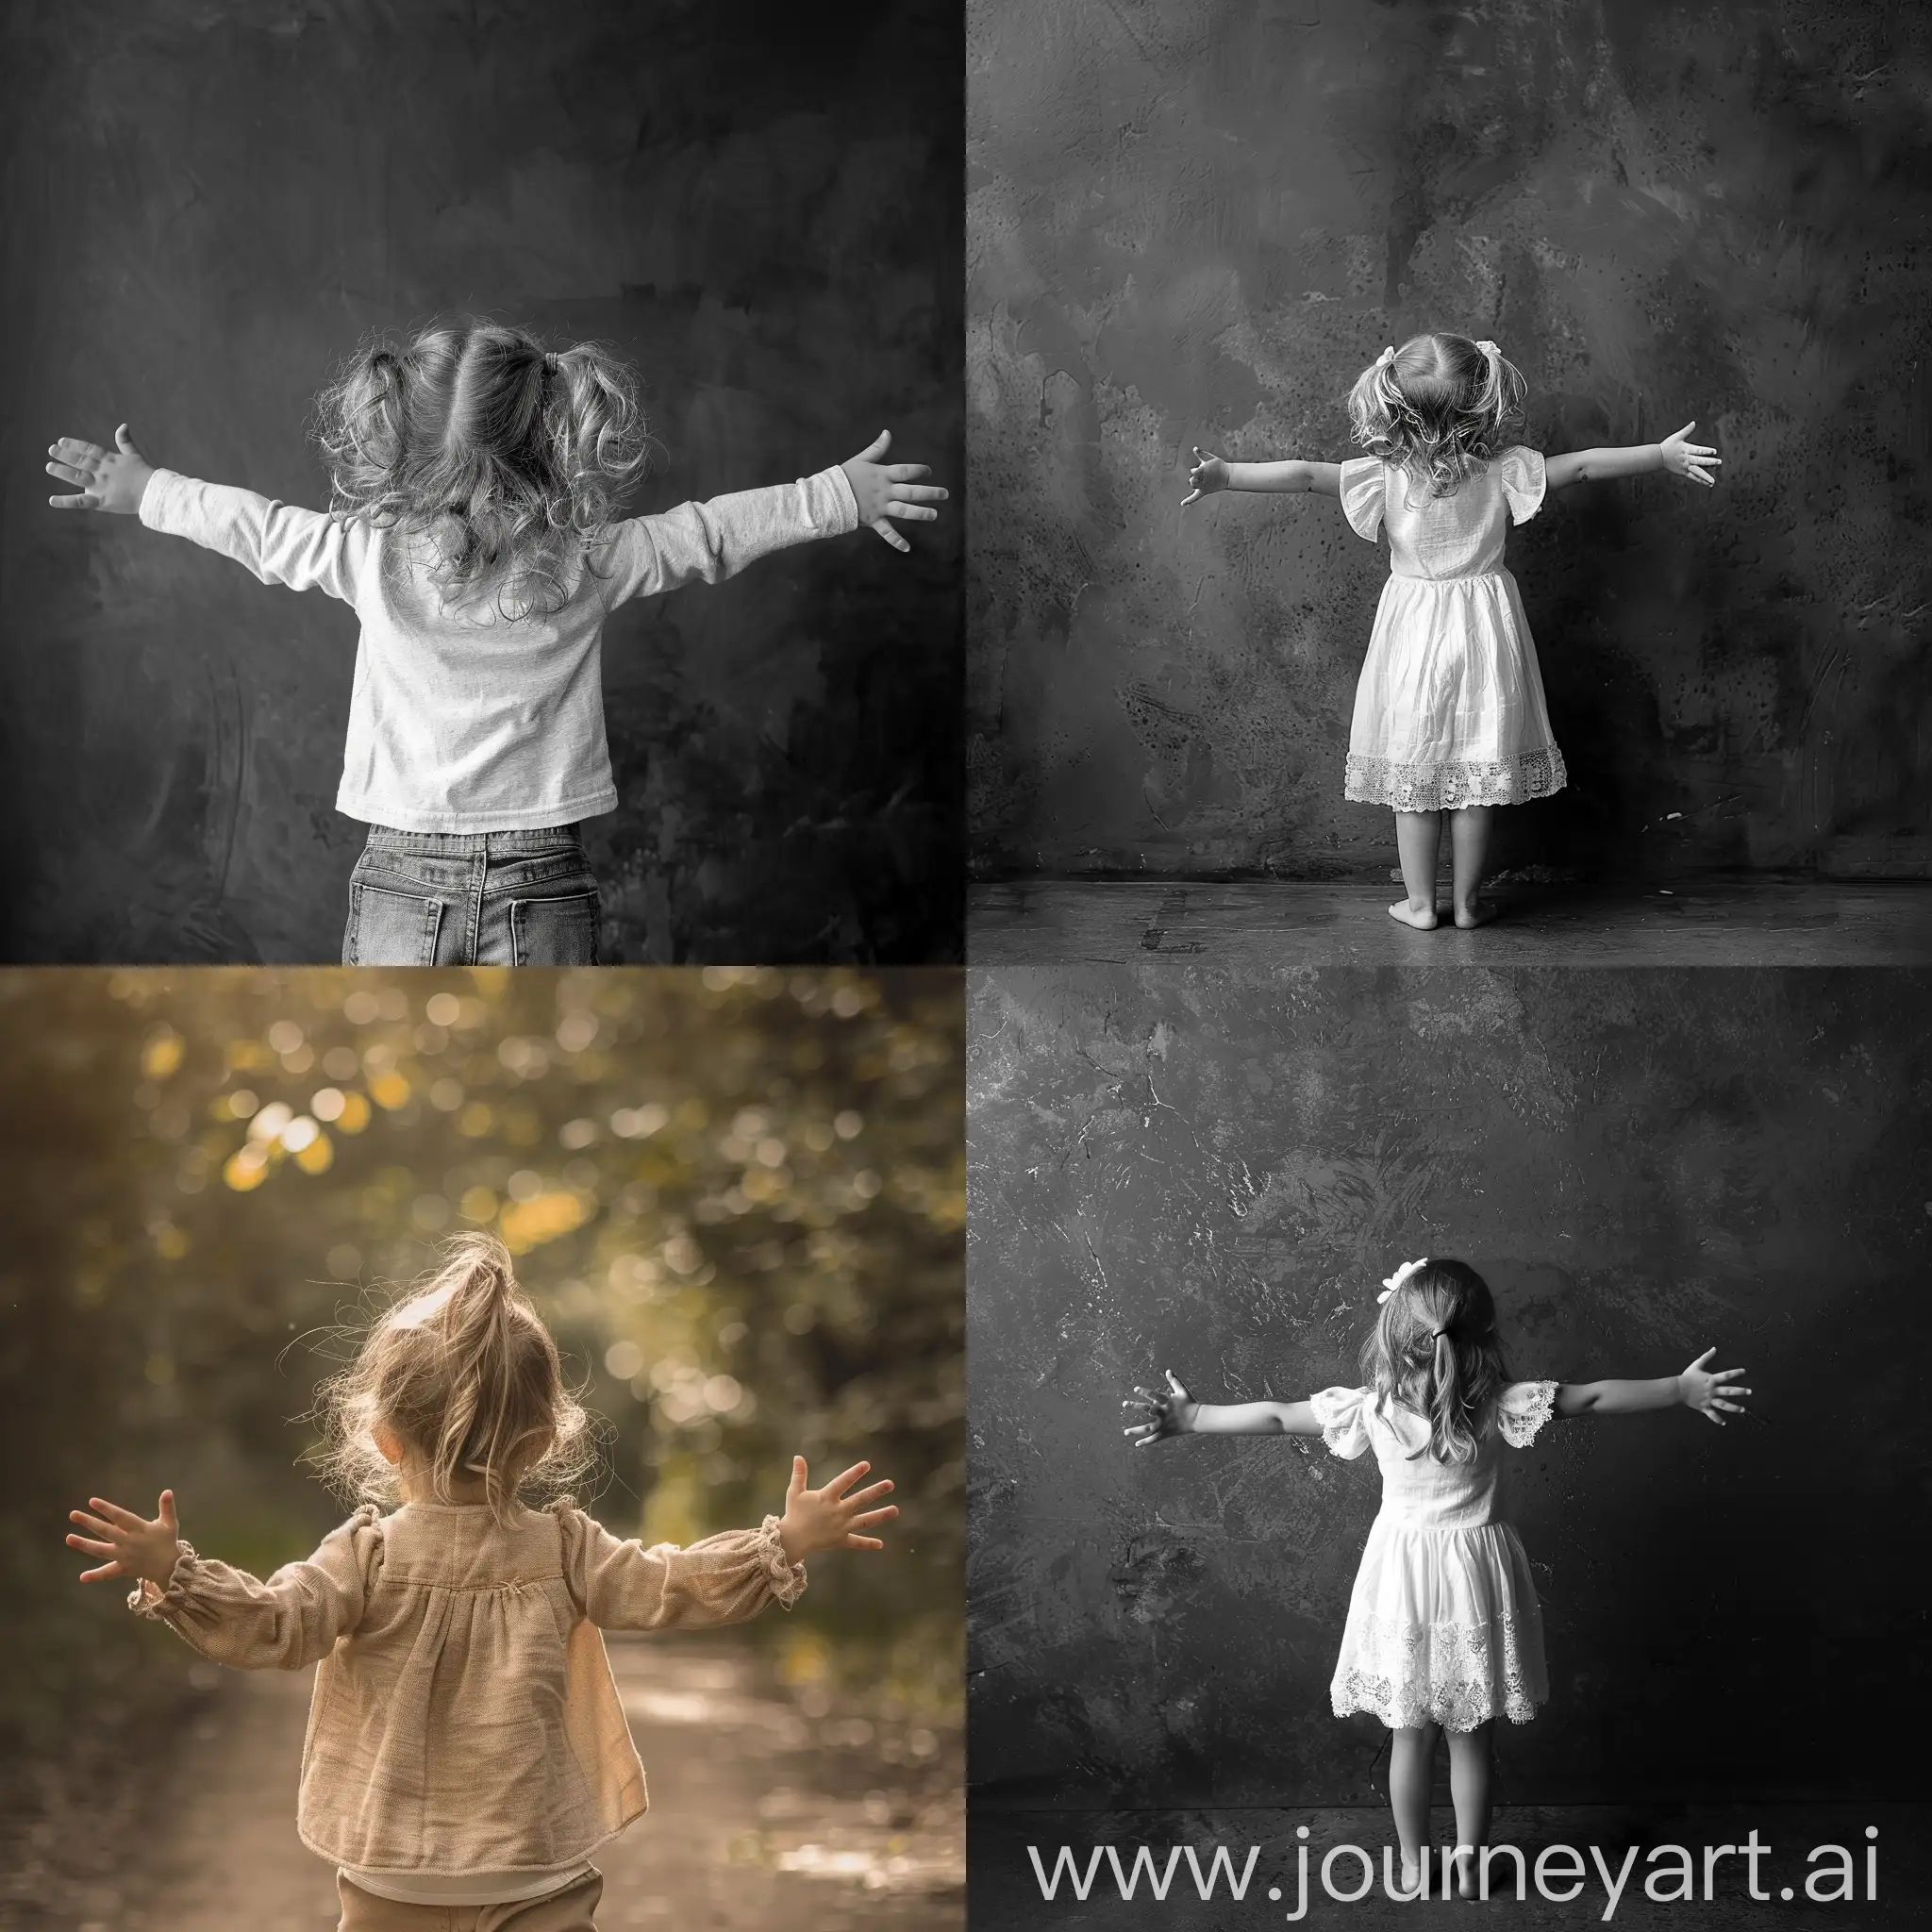 Joyful-Little-Girl-with-Outstretched-Arms